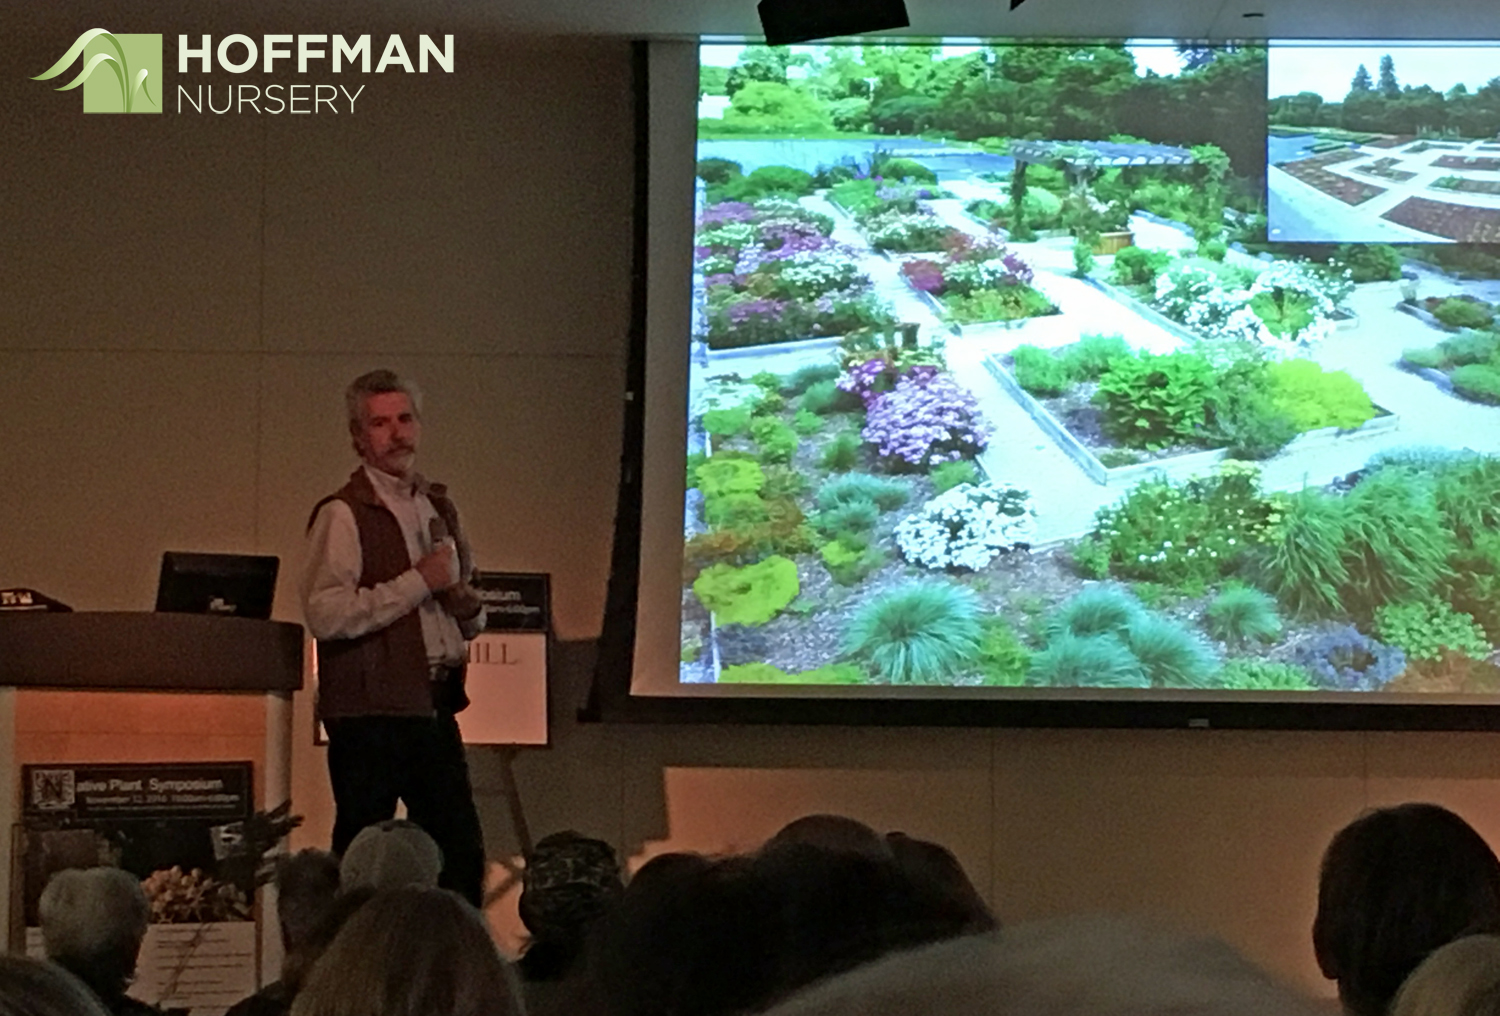 Steve Castorani of North Creek Nurseries started his talk on perennials for pollinators with a description of North Creek's trial and demonstration gardens.